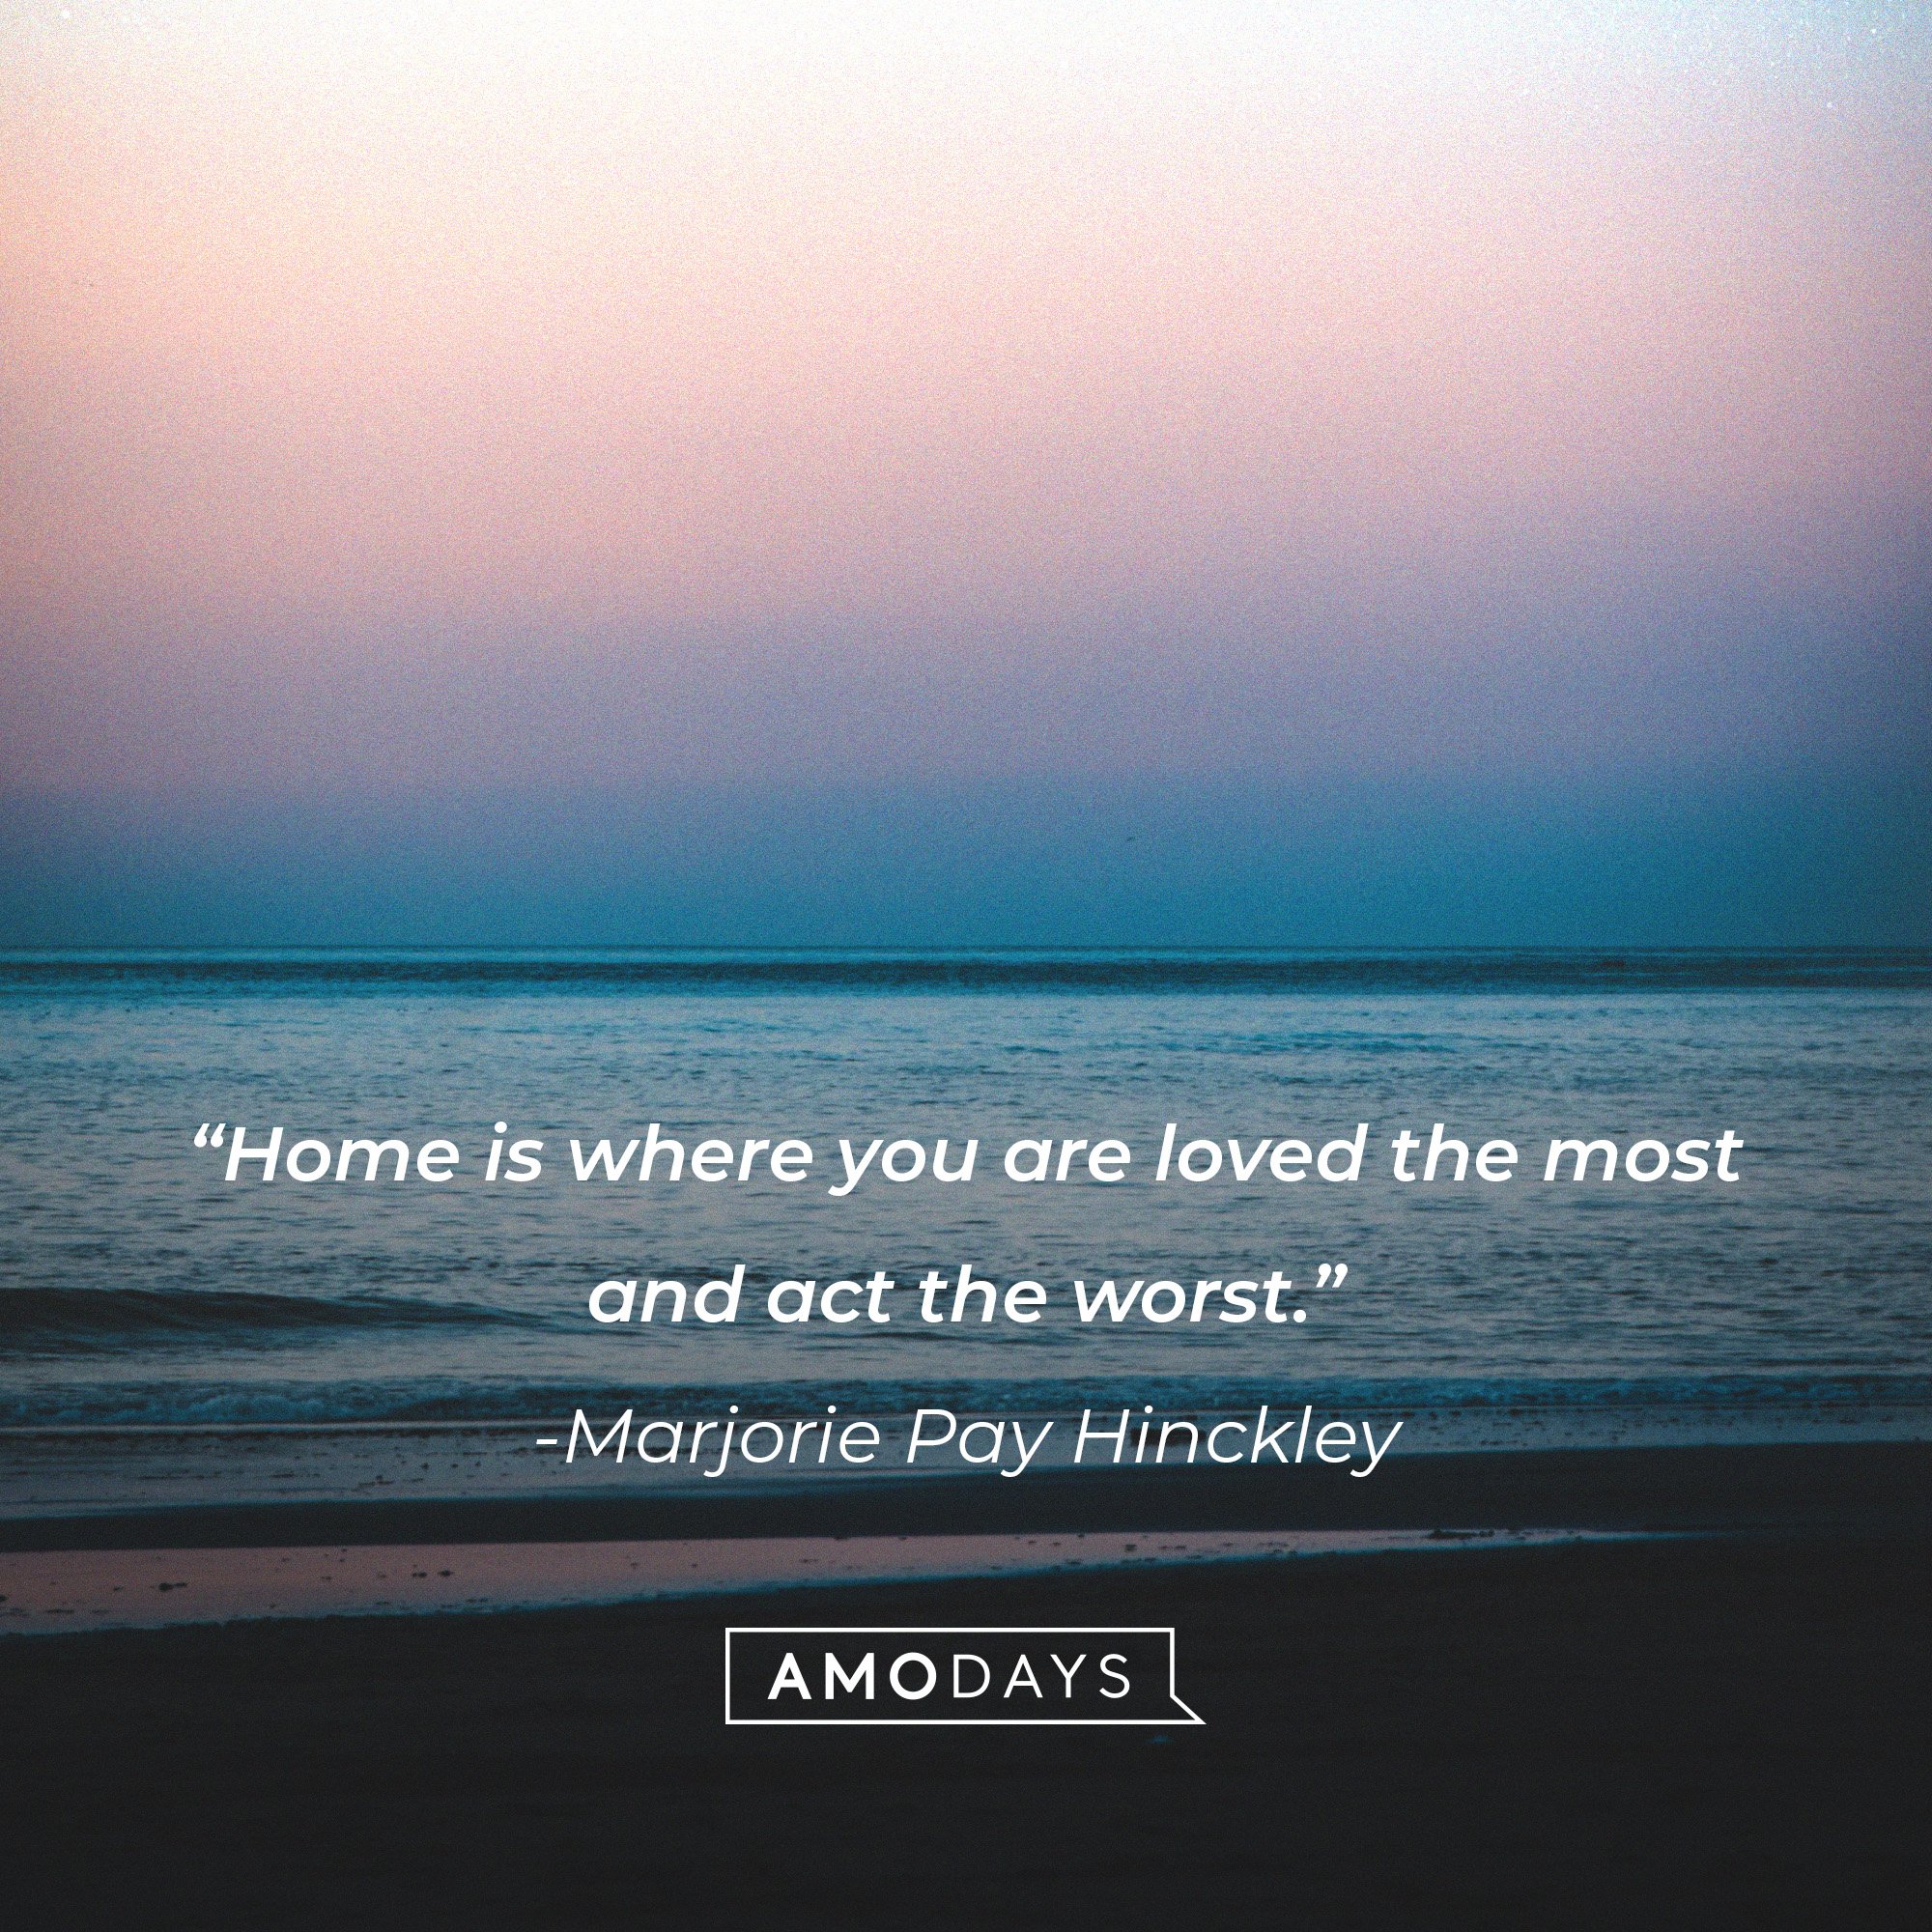 Marjorie Pay Hinckley's quote: “Home is where you are loved the most and act the worst.” | Image: AmoDays